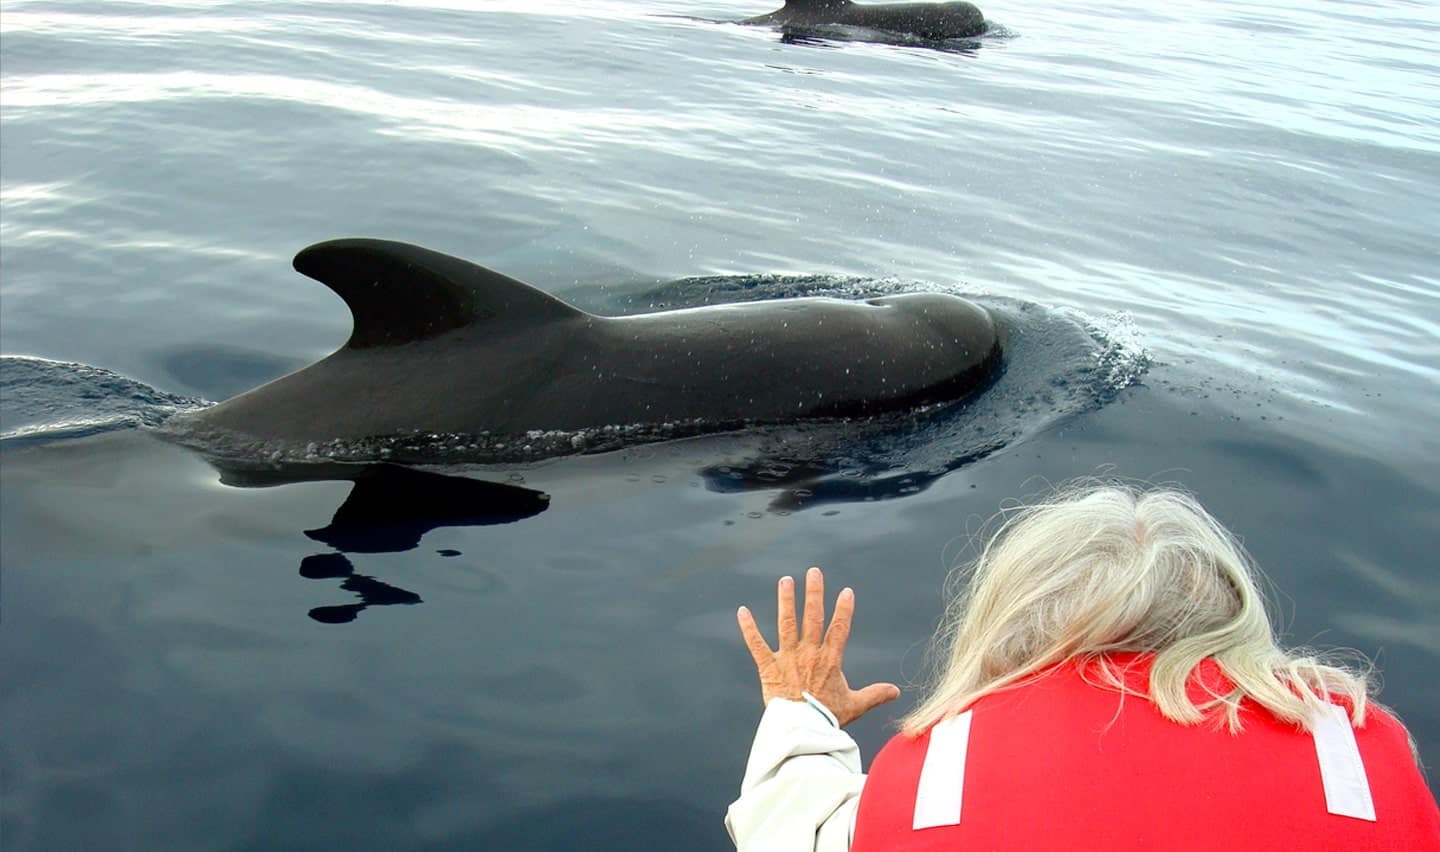 Up-Close with Whale in Galapagos